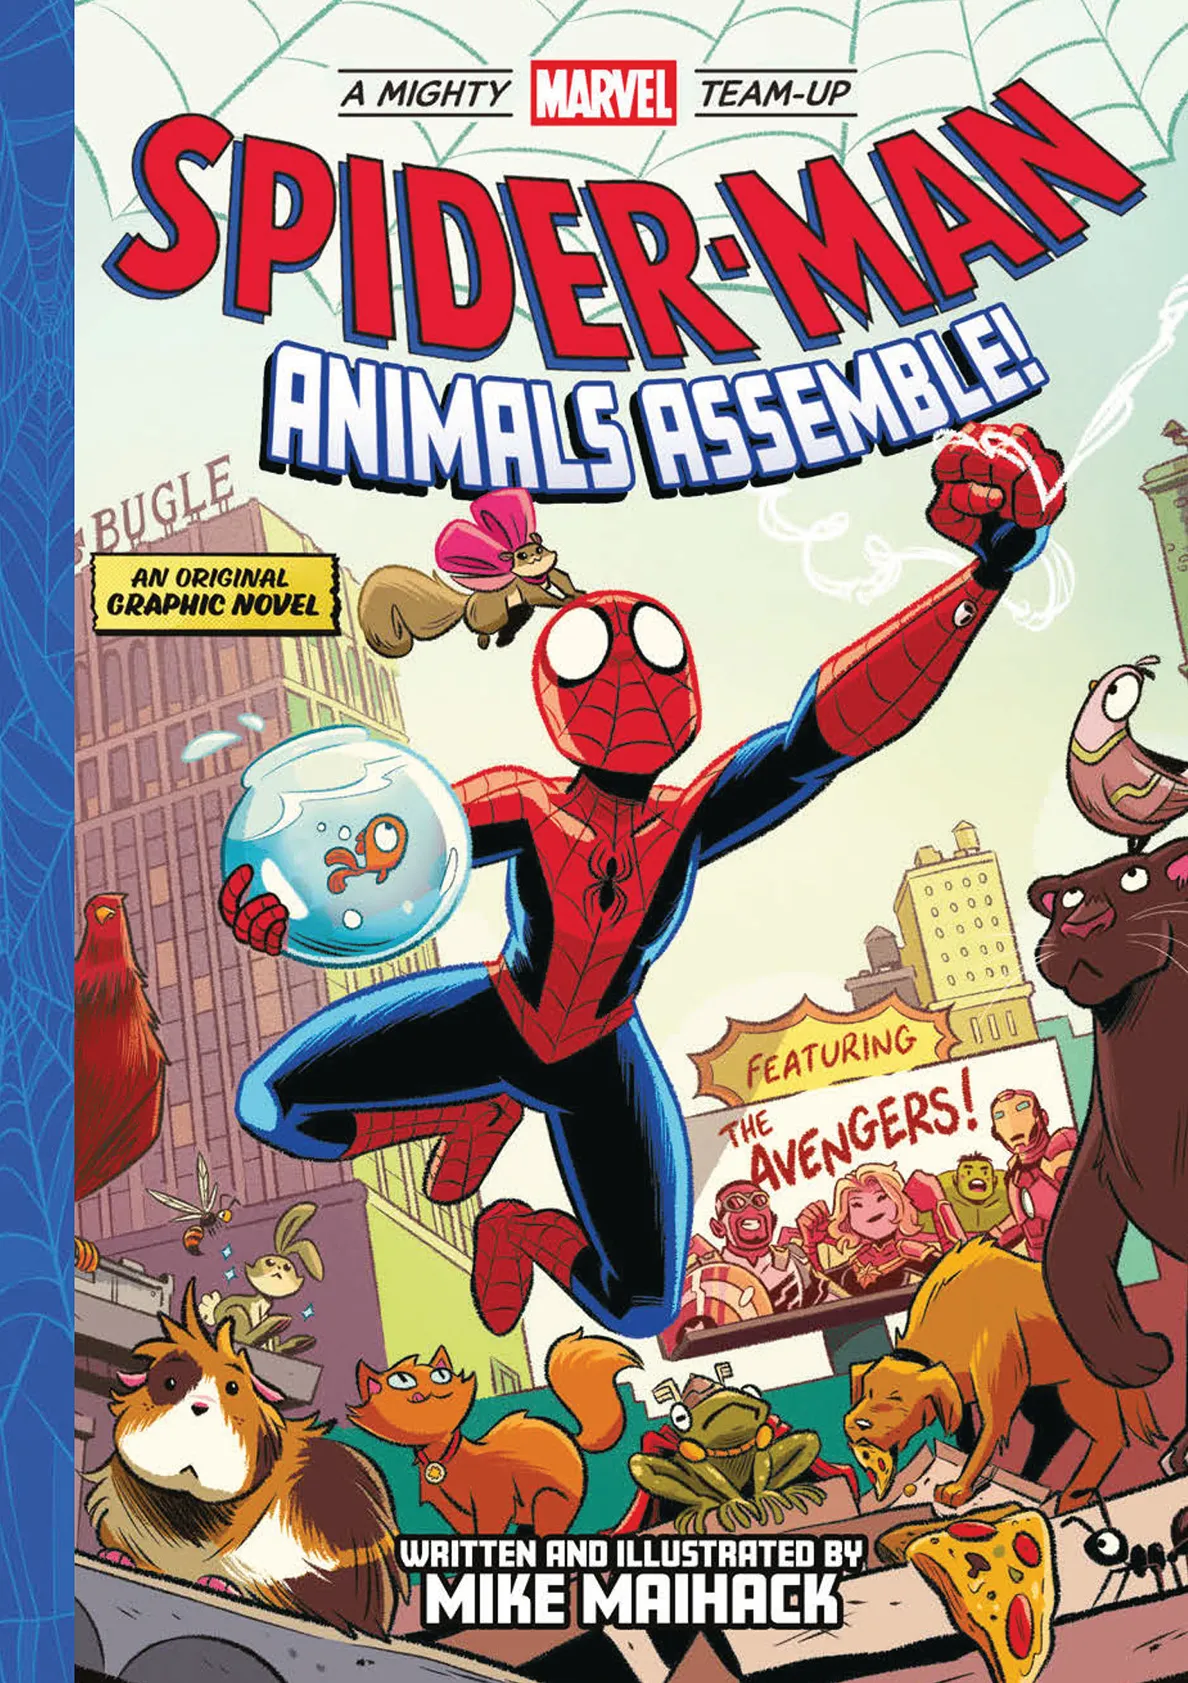 Spider-Man: Animals Assemble! (A Mighty Marvel Team-Up #1)